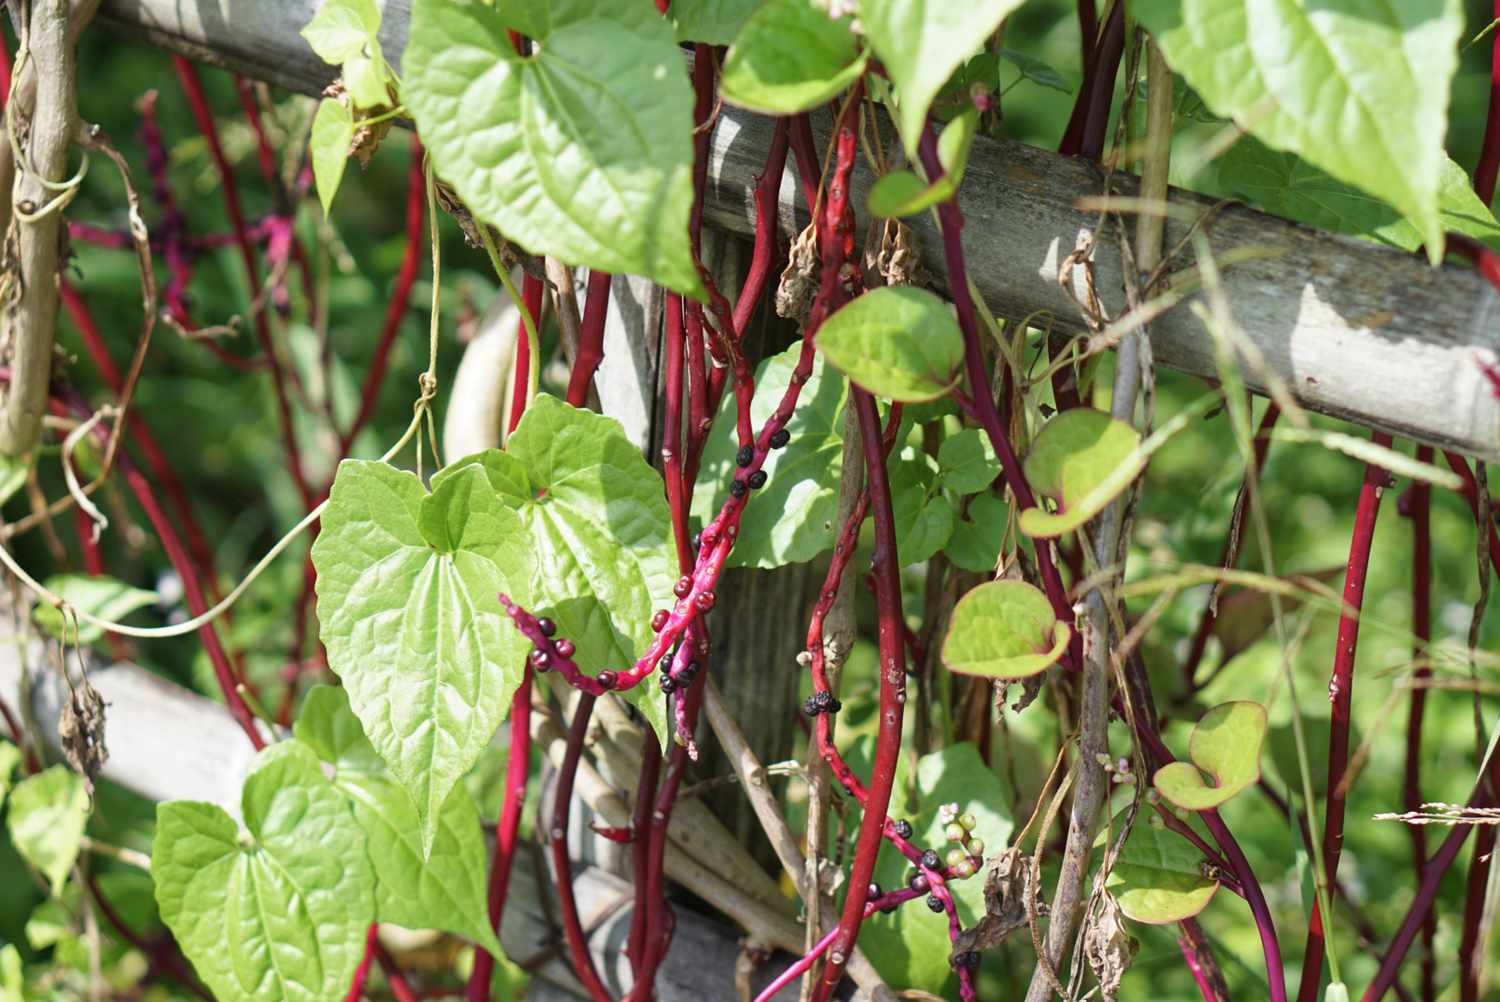 Malabar spinach vines hanging off wooden posts with leaves in sunlight